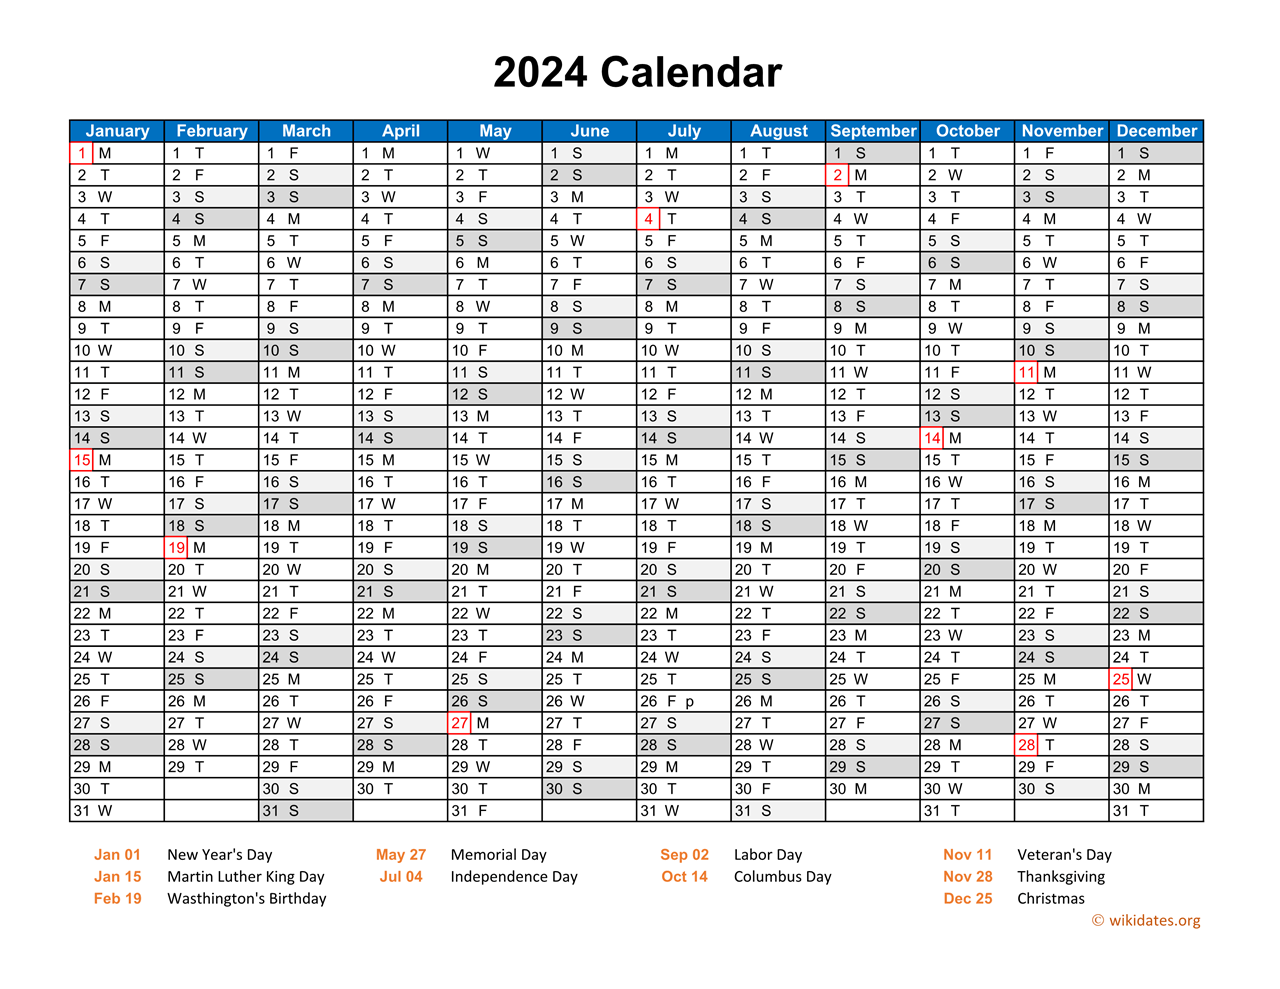 2024 calendar templates and images 2024 yearly calendar blank minimal